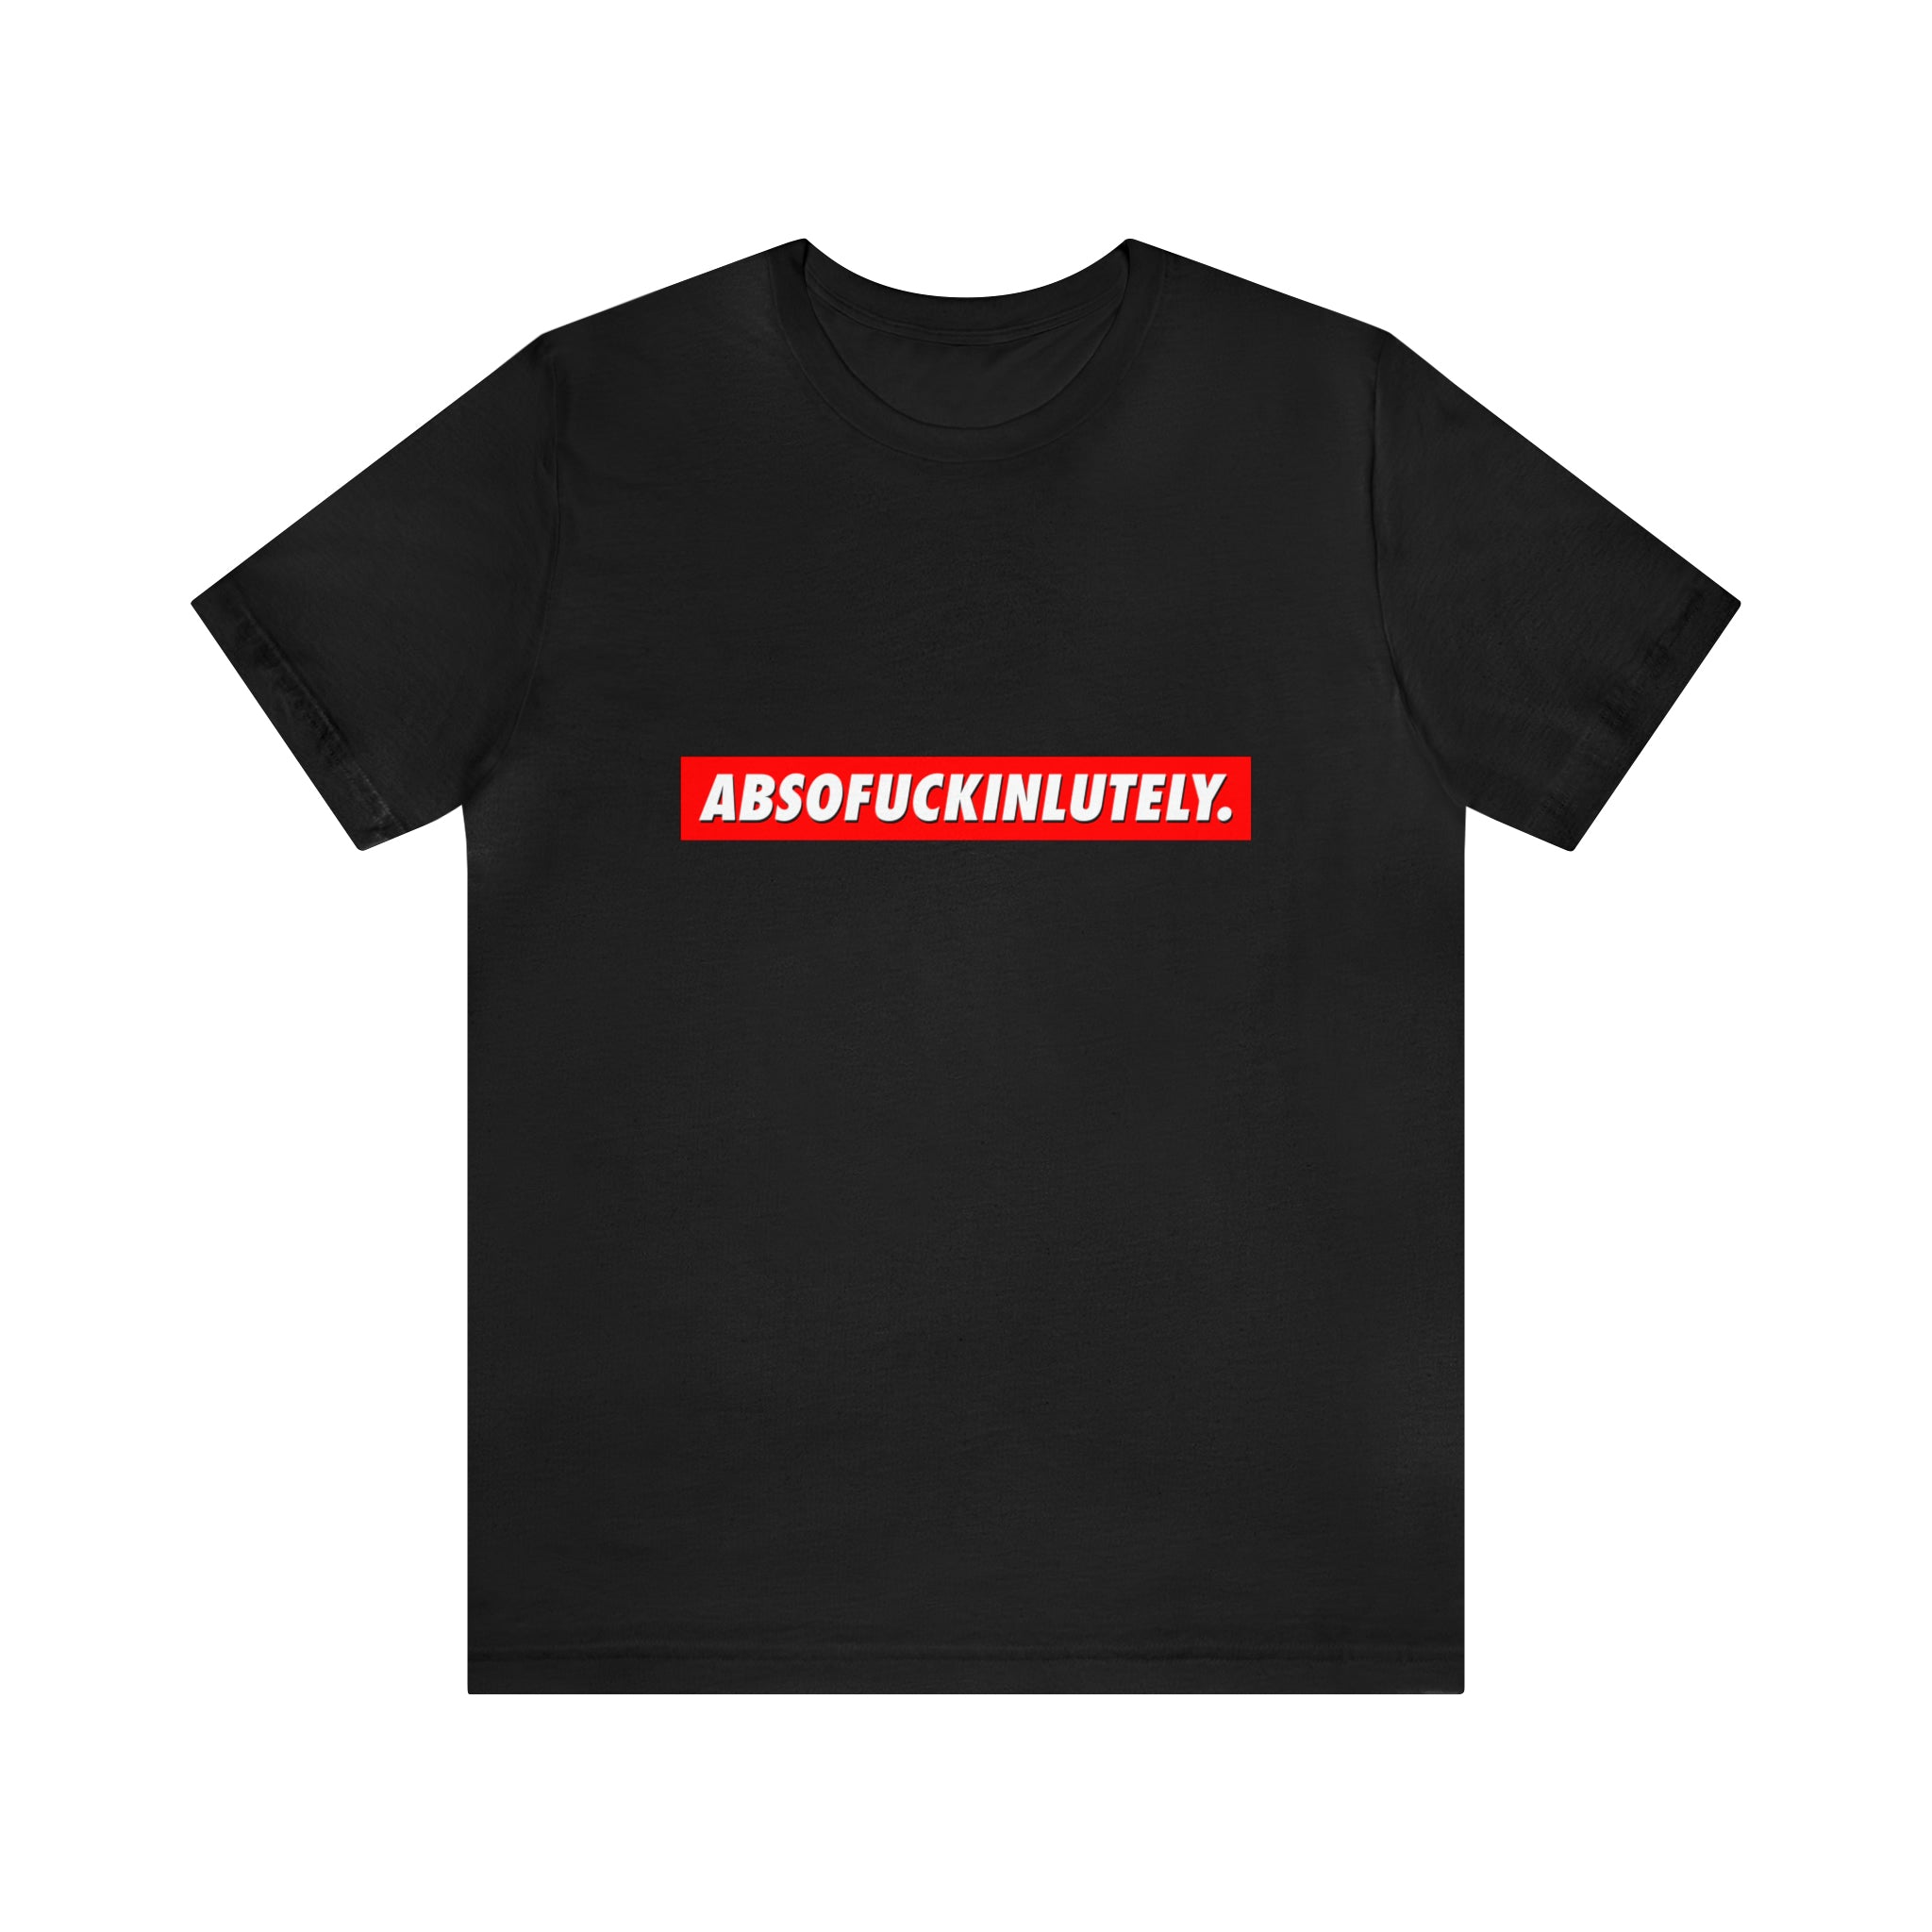 An eye-catching Absofuckinlutely T-shirt with a bold red logo.